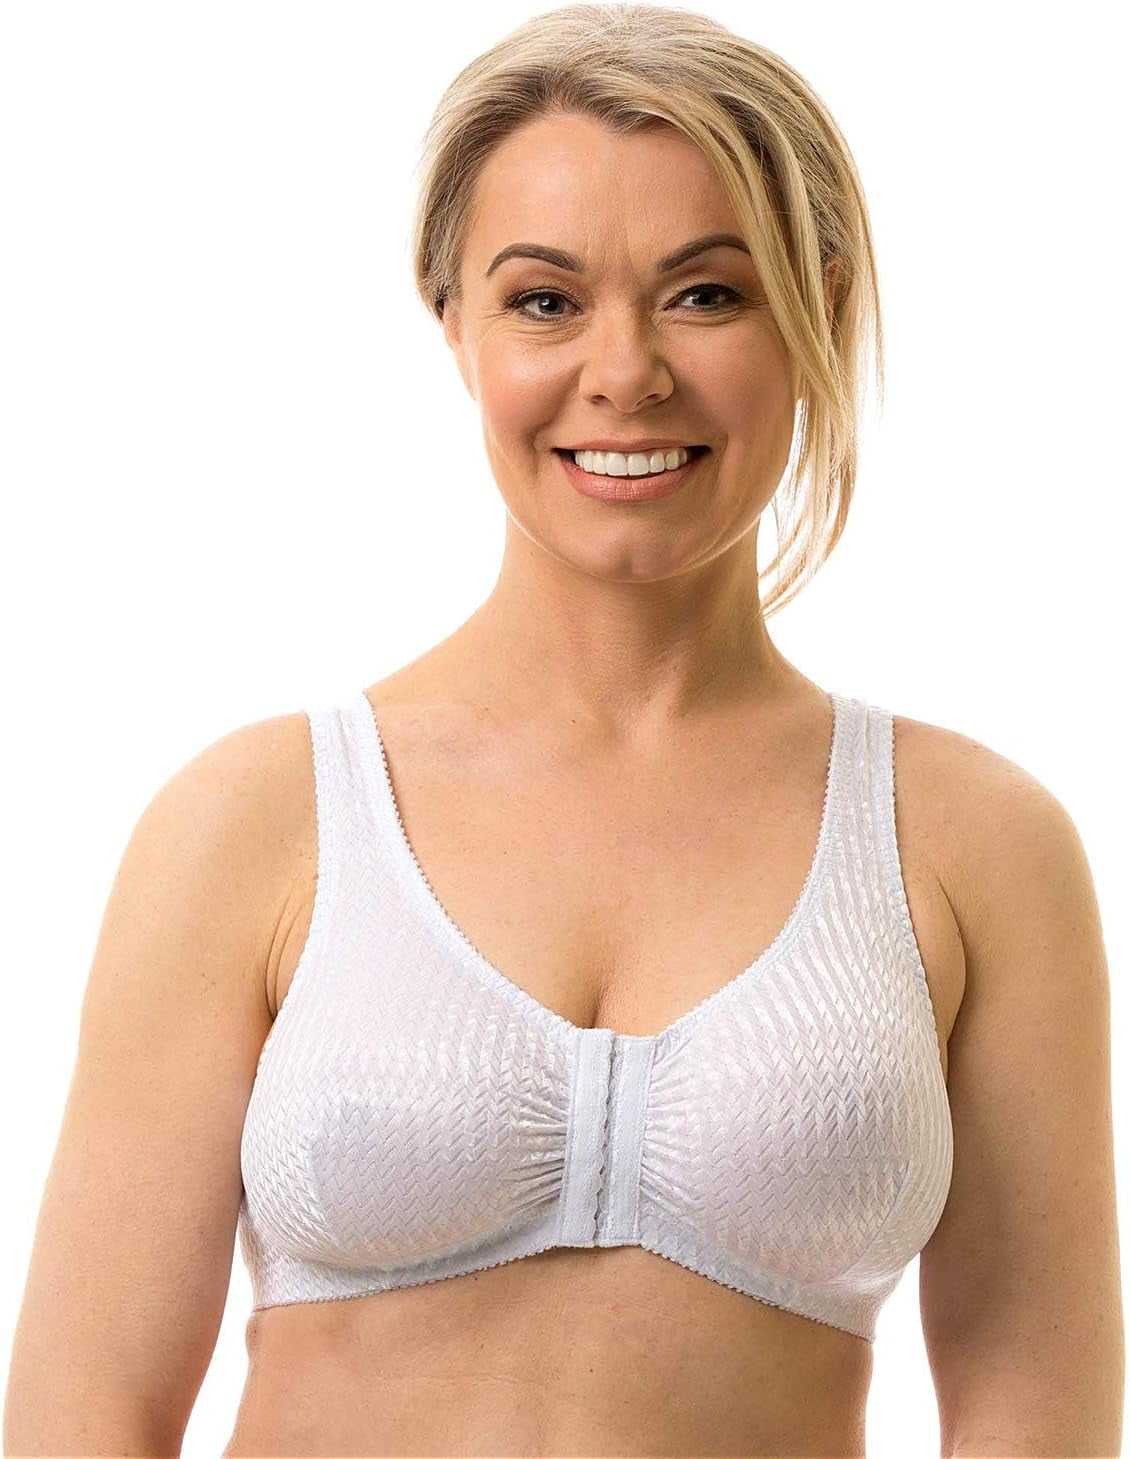 Resolved] ClearPointDirect/Full Freedom Comfort Bra(Set of 2) Review: Freedom  Bras ordered but not received 